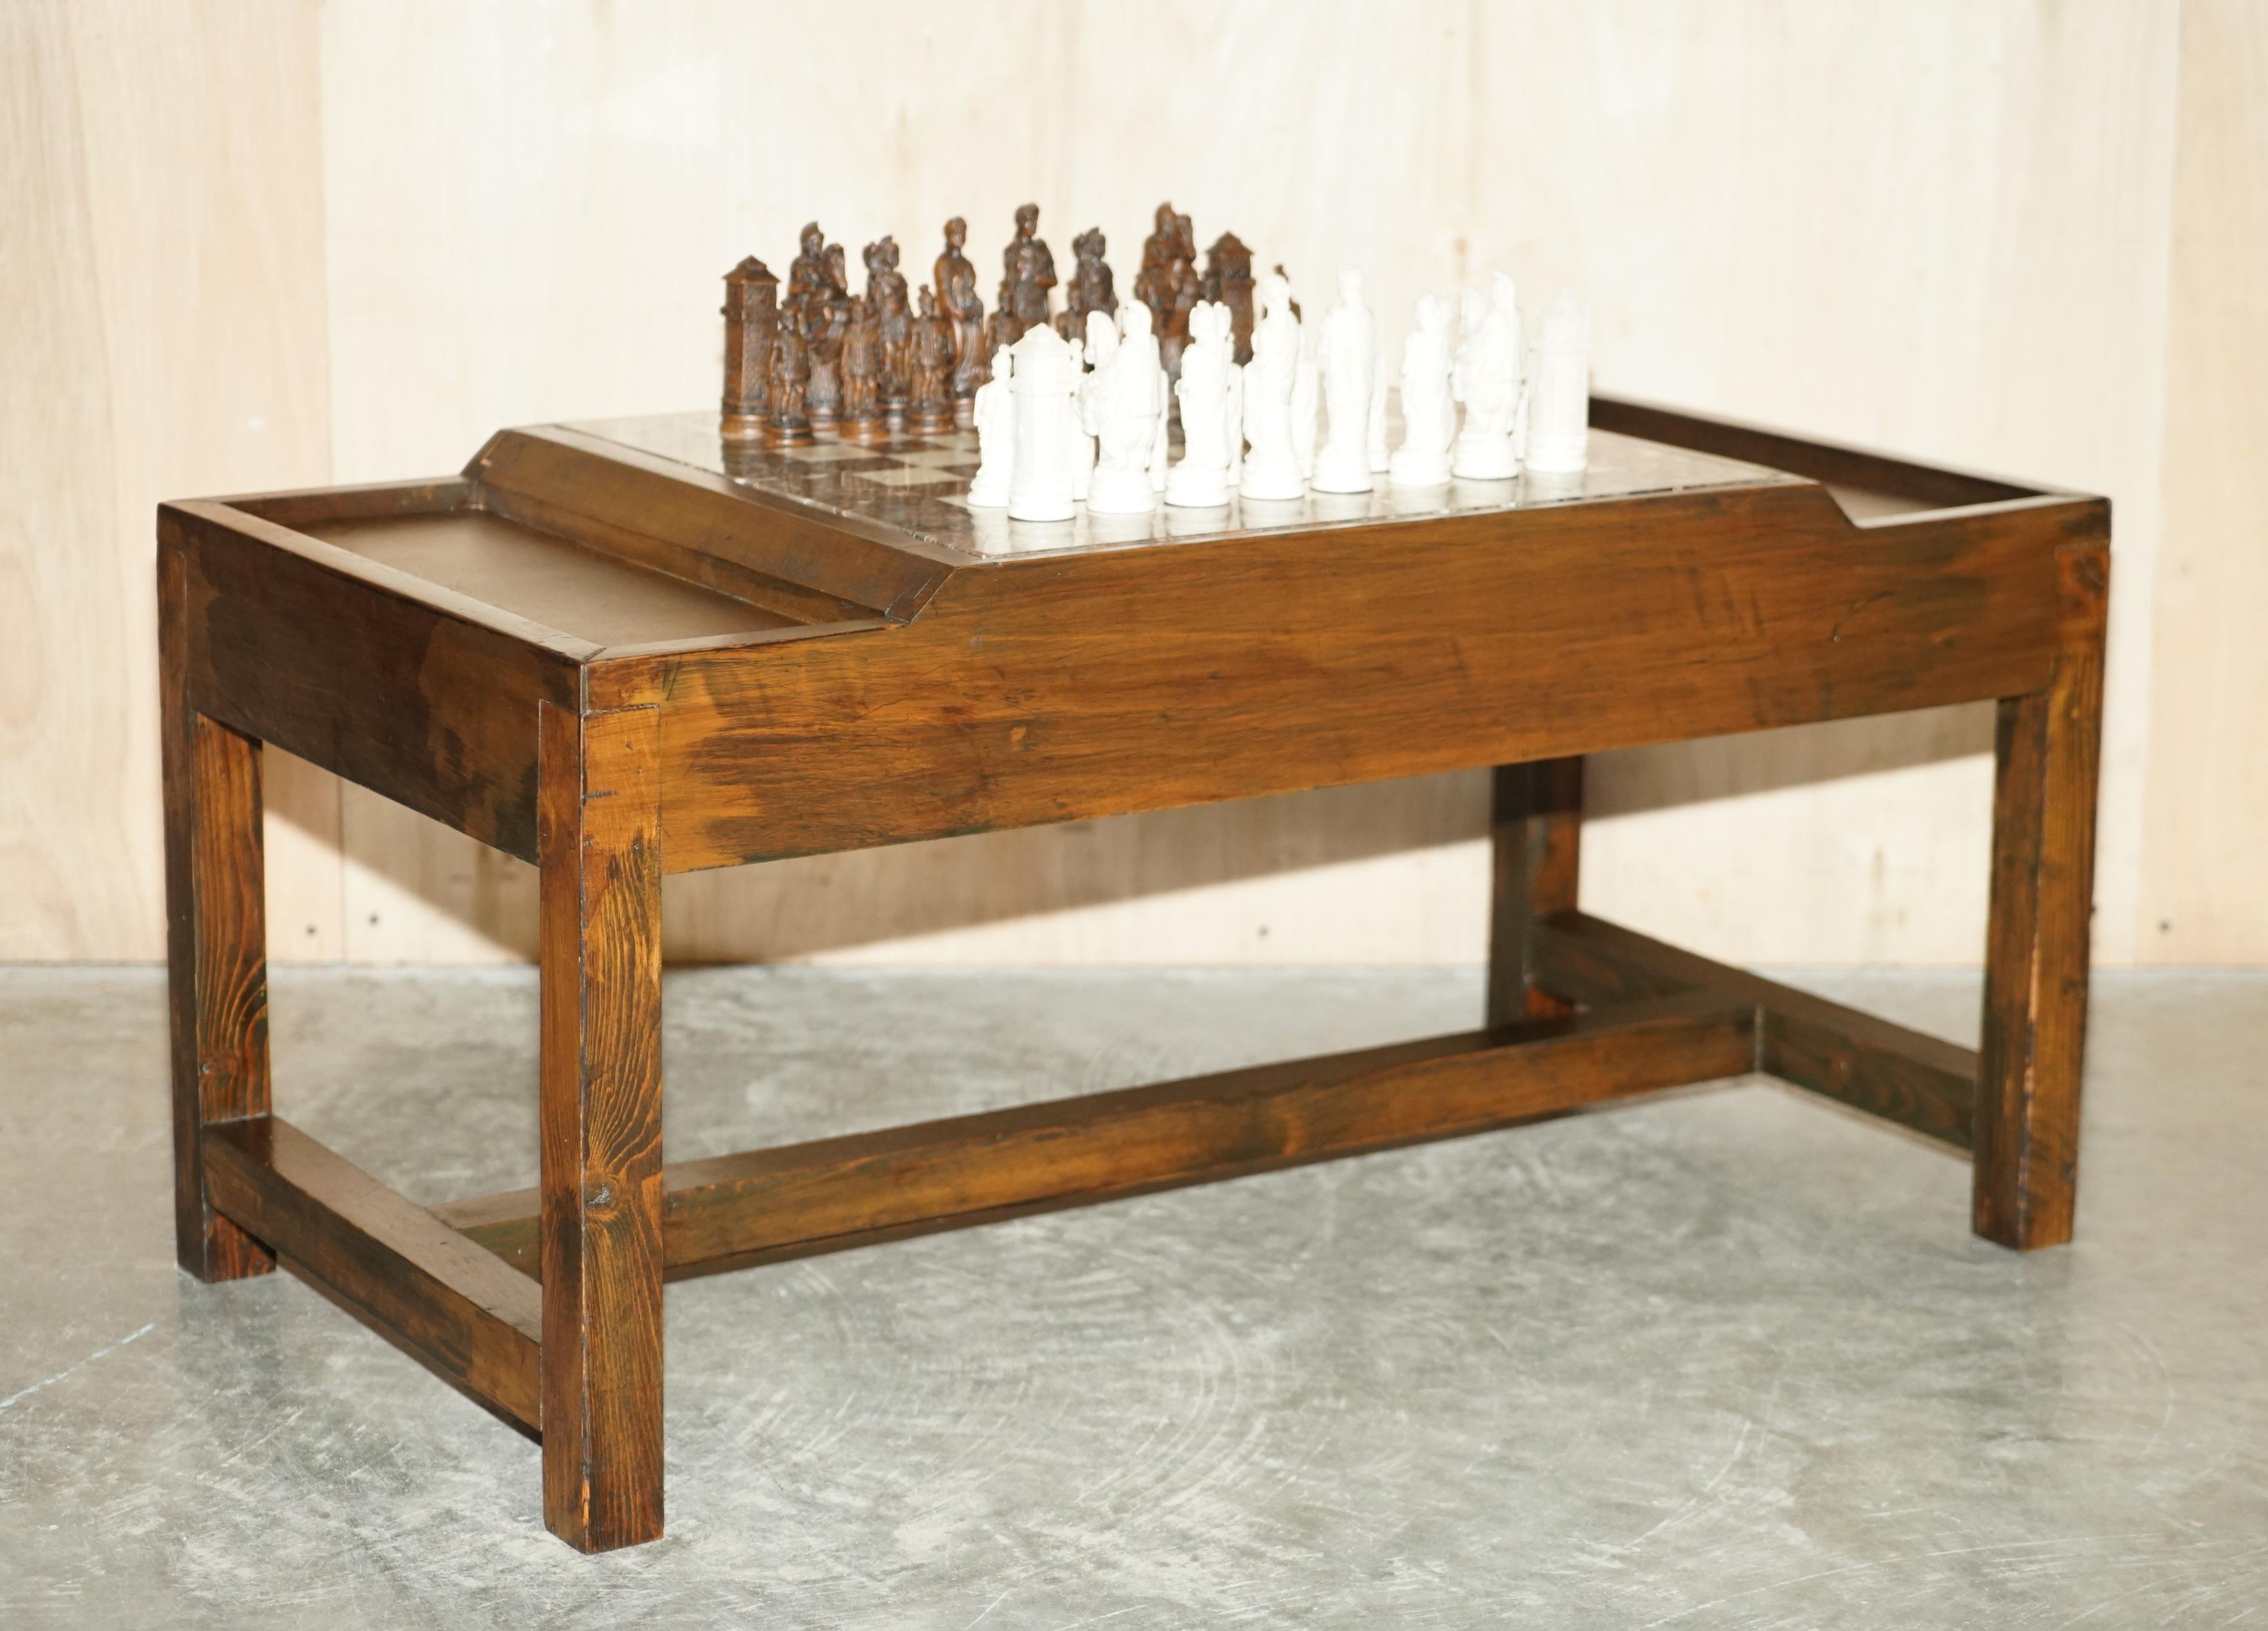 We are delighted to offer for sale this lovely English oak vintage chess coffee table with marble chess board and period ebonised chess set.

A good looking and well made piece, it can be used as a normal coffee table of course, it has a thick cut